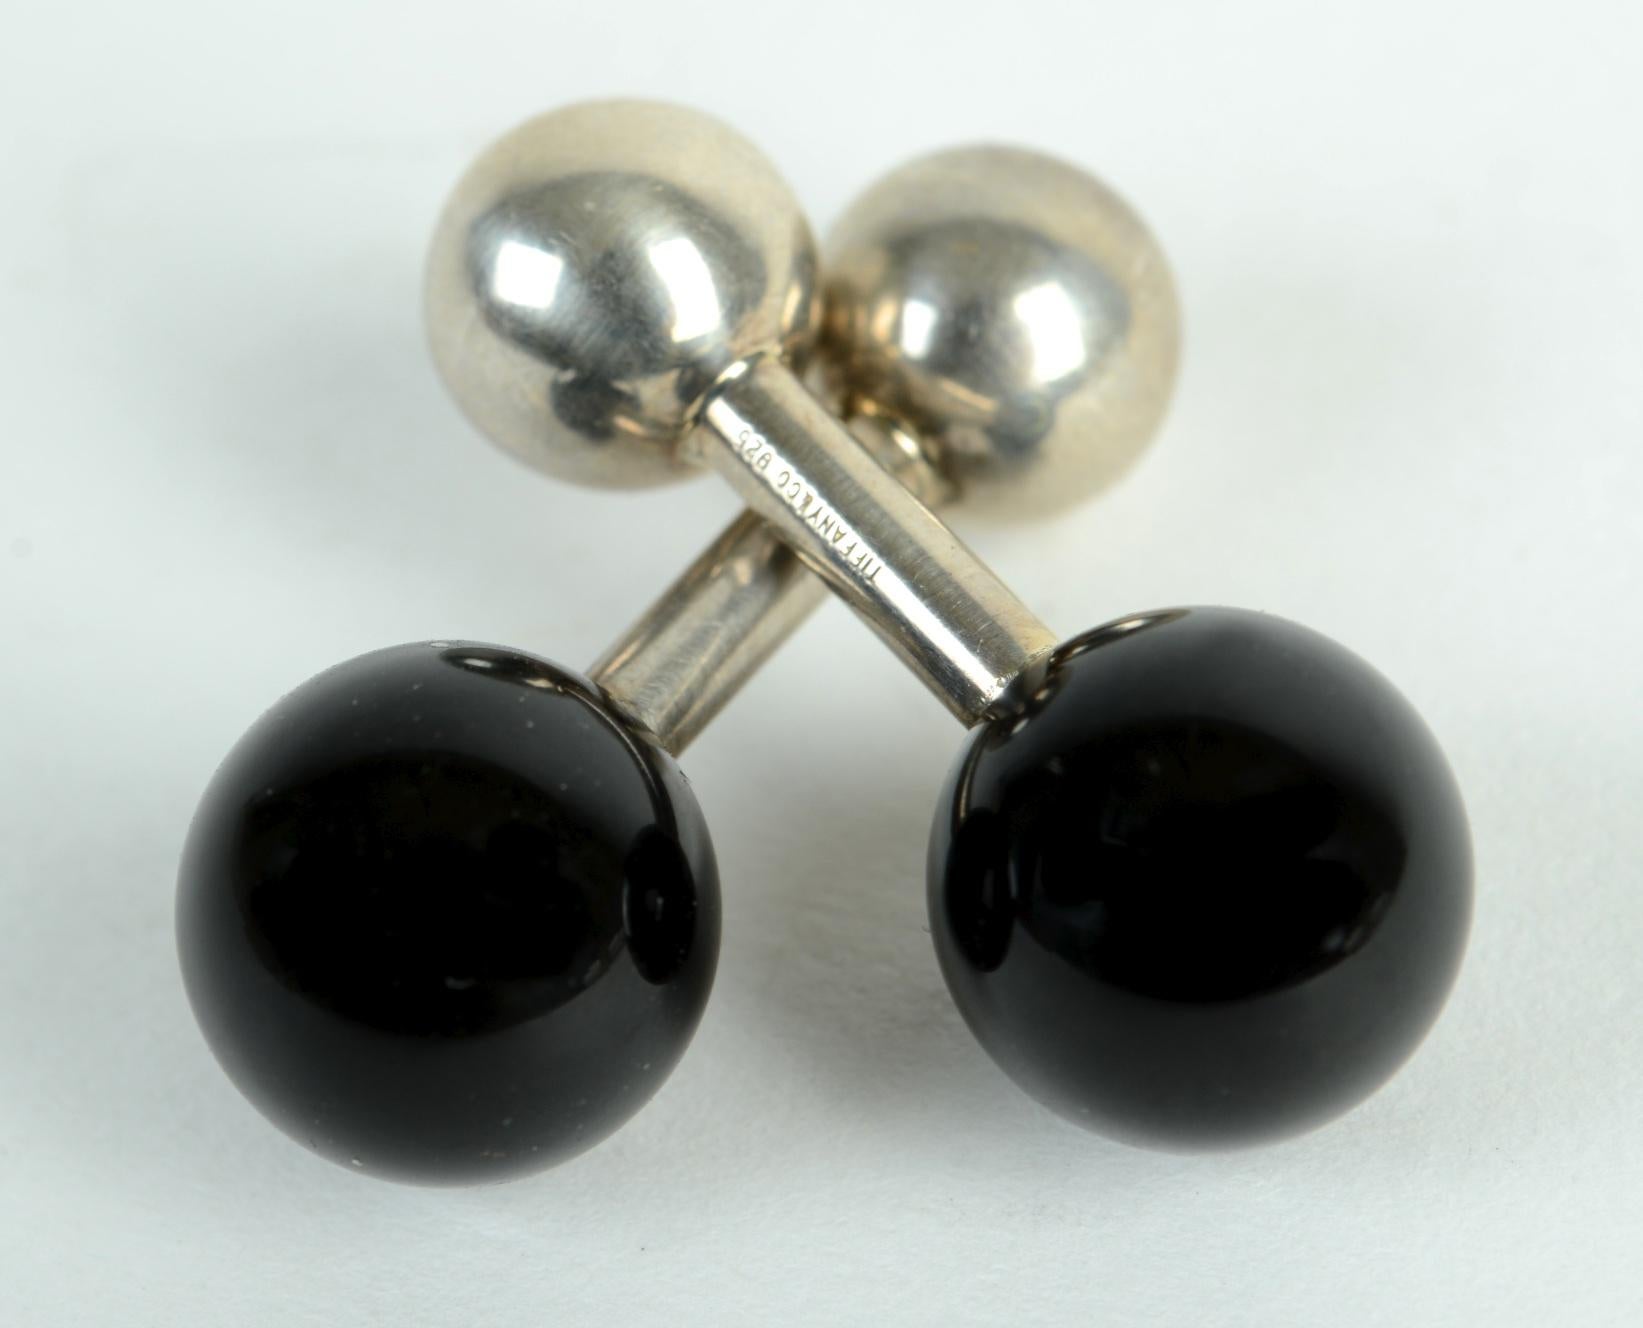 Classic Sterling Silver and Black Onyx Barbell Cufflinks by Tiffany & Co. They are reversible, sterling ball or black onyx, or one of each. Both are signed Tiffany & Co. 925. 
N.P. Trent has been a respected name in antiques for over 30 years with a